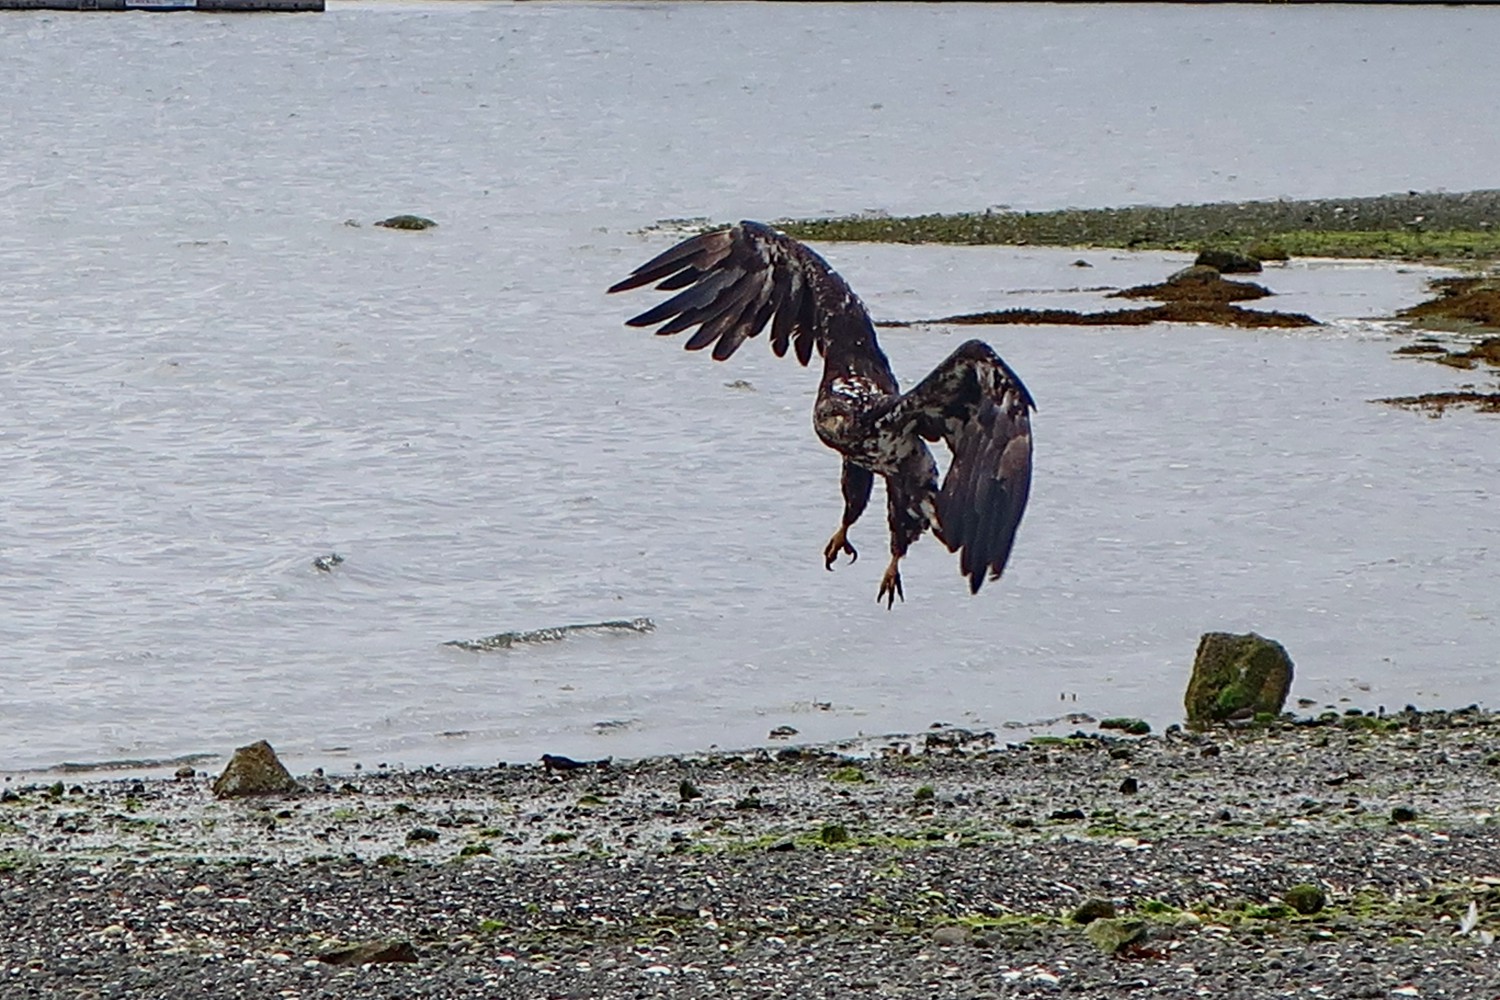 Younger Bald Eagle on the beach of Port Hardy close to the Visitor Center